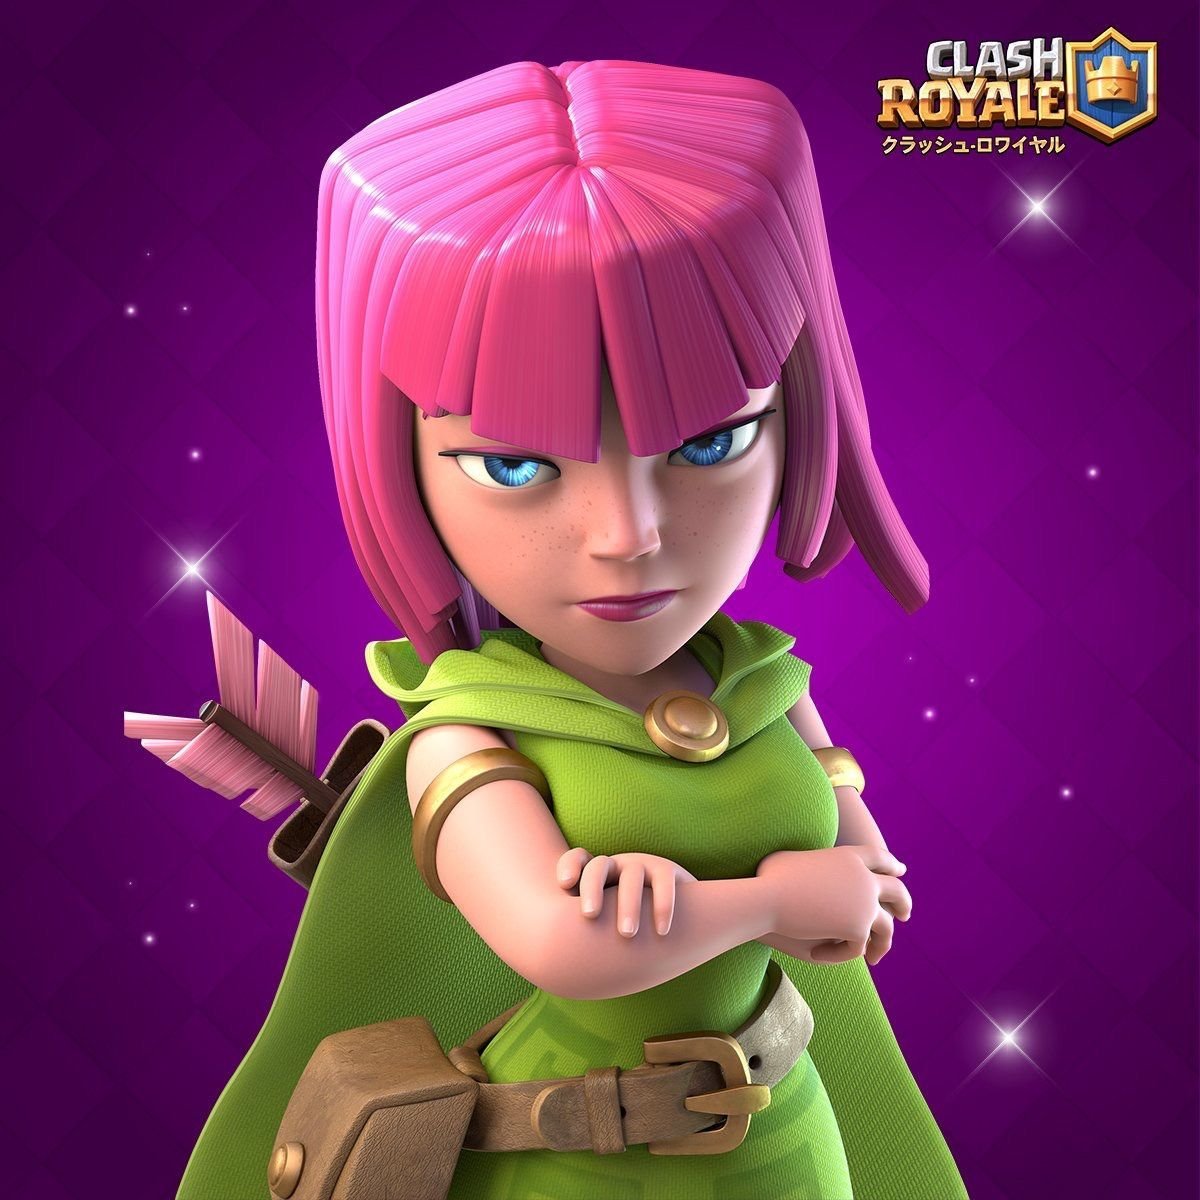 Clans of royale. Королева лучница из Clash Royale. Лучница клеш рояль. Королева лучниц клеш 18. Королева лучница клеш рояль.